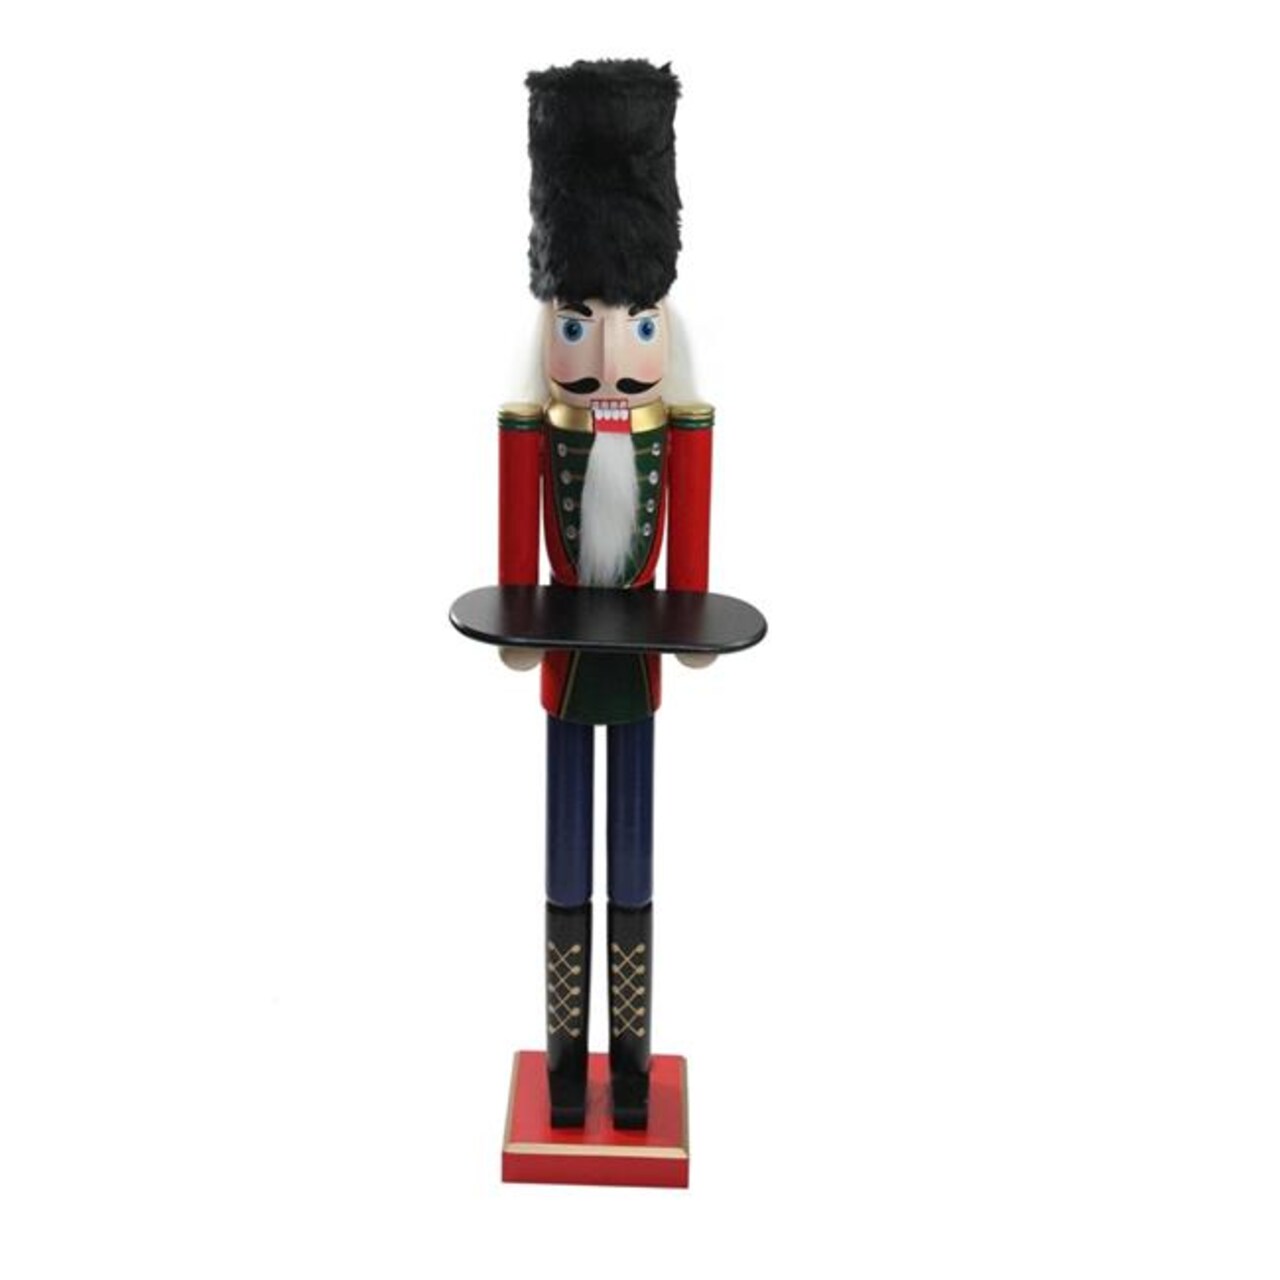 Northlight 32633970 48.25 in. Decorative Red Solider Wooden Christmas Nutcracker Butler with Tray